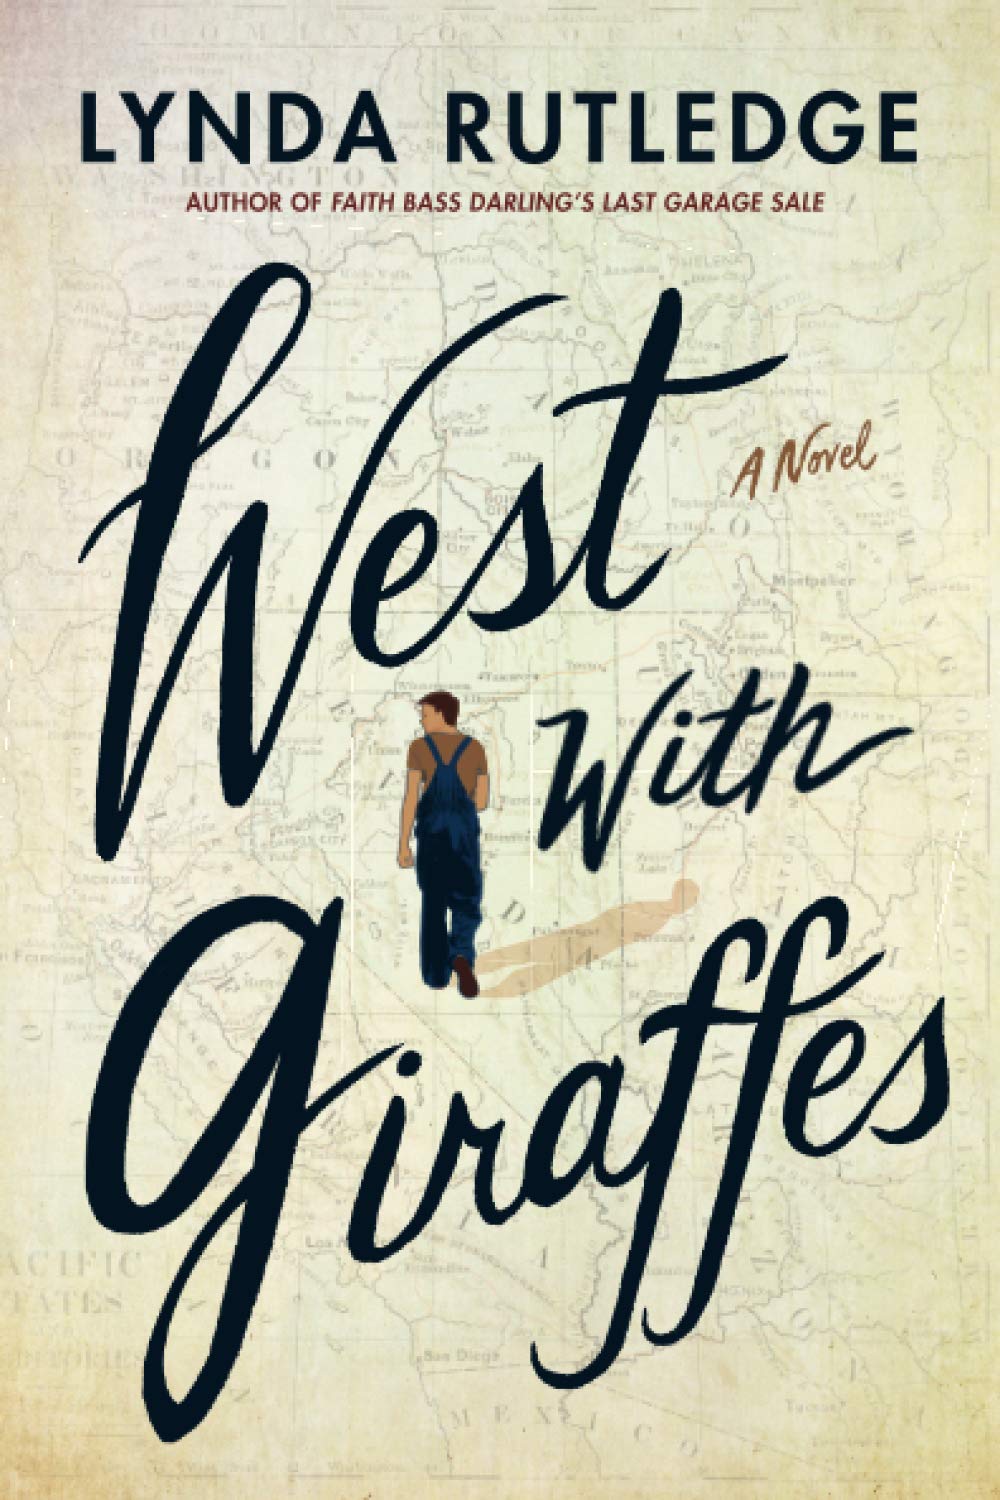 Book Cover for "West With Giraffes" by Lynda Rutledge